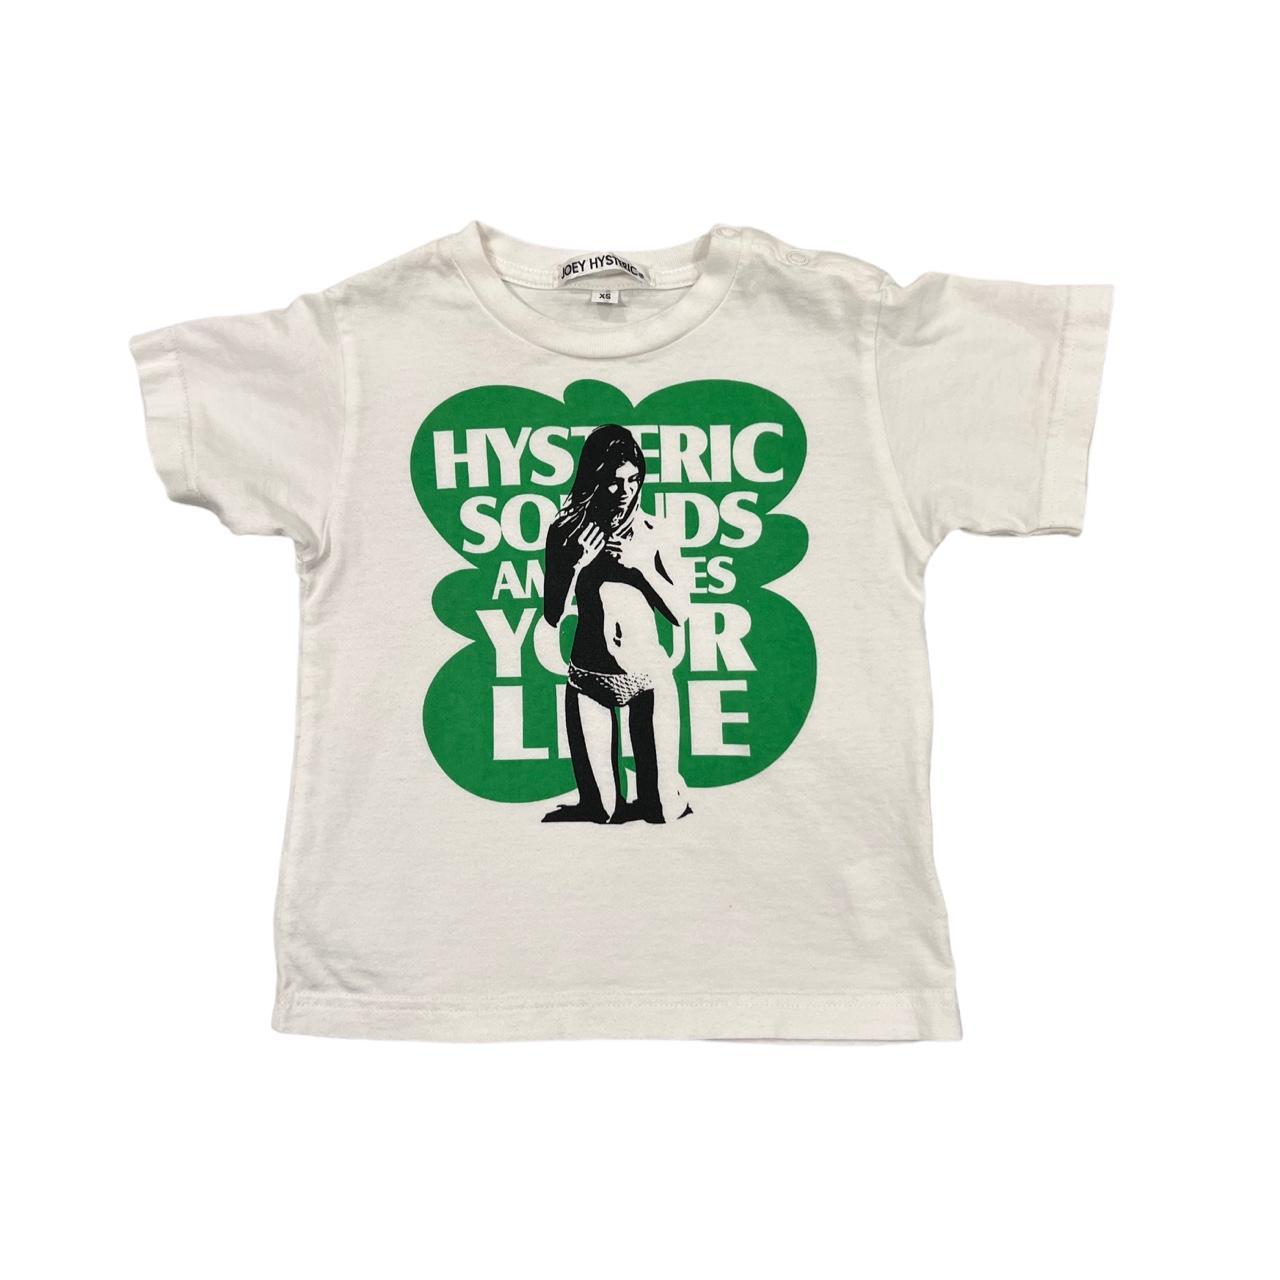 Joey Hysteric White XS Tee “Hysteric Sounds” Baby